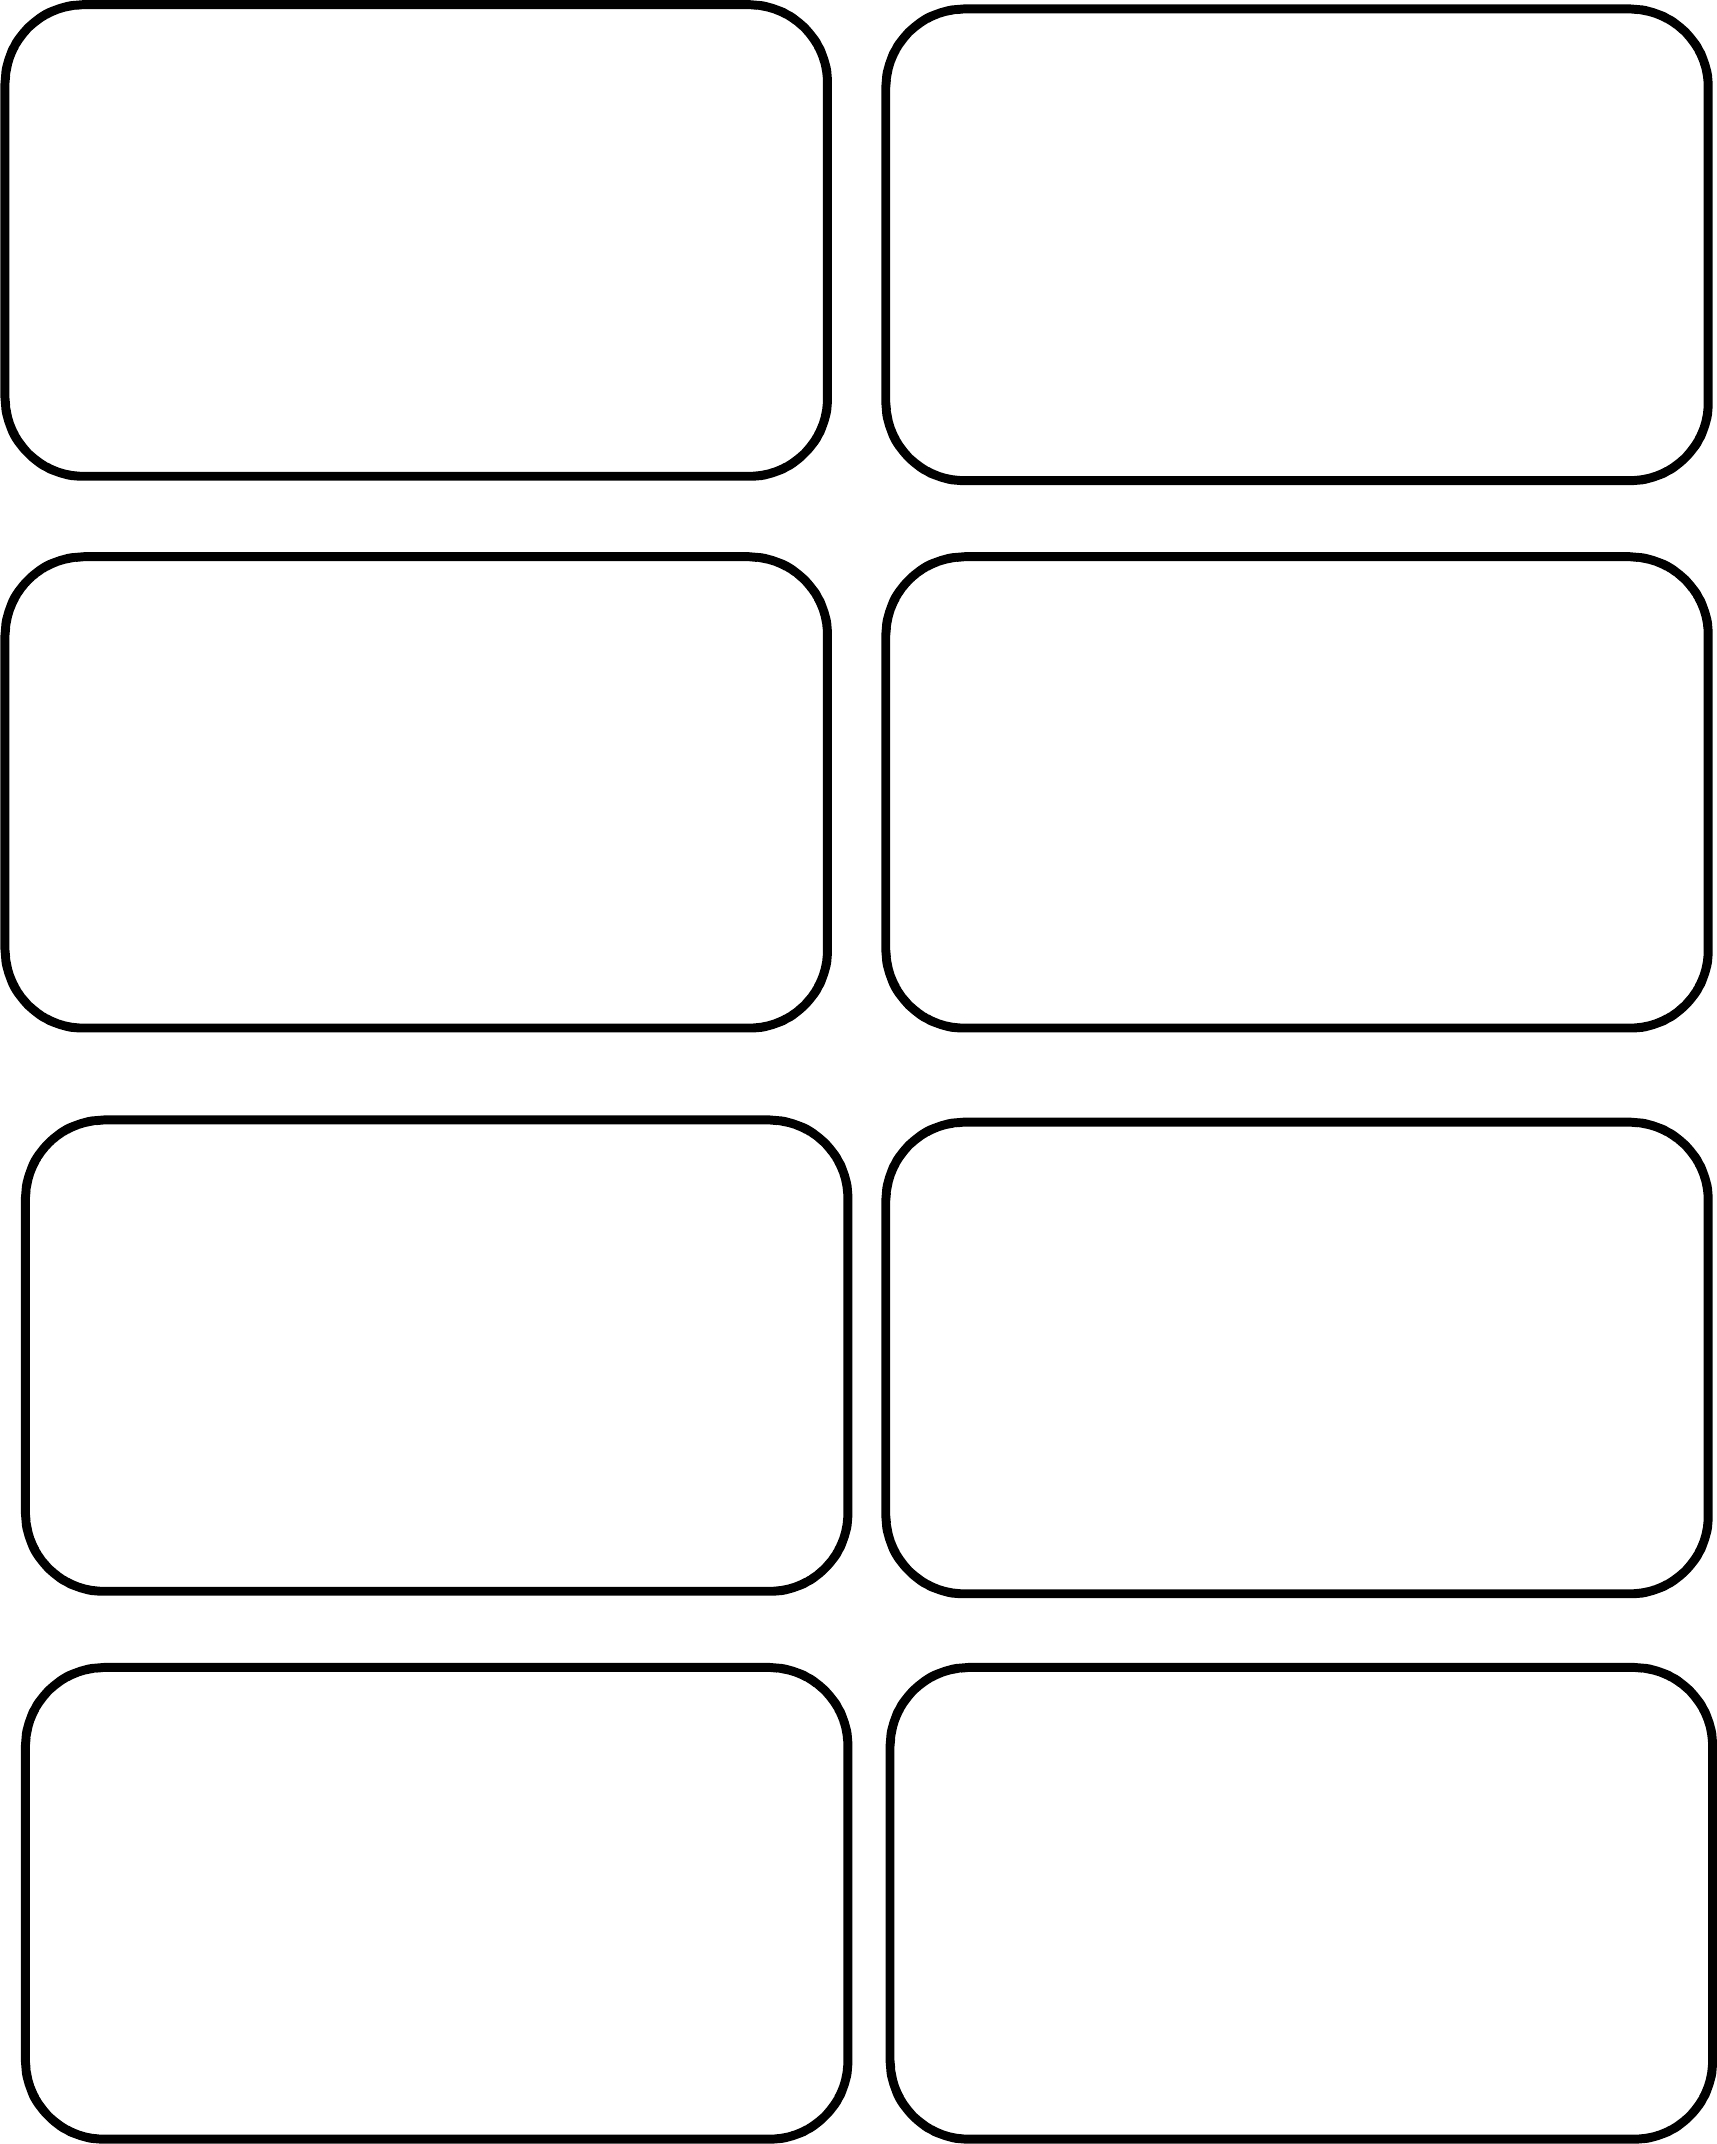 Template Of Luggage Tag Free Download Intended For Blank Luggage Tag Template